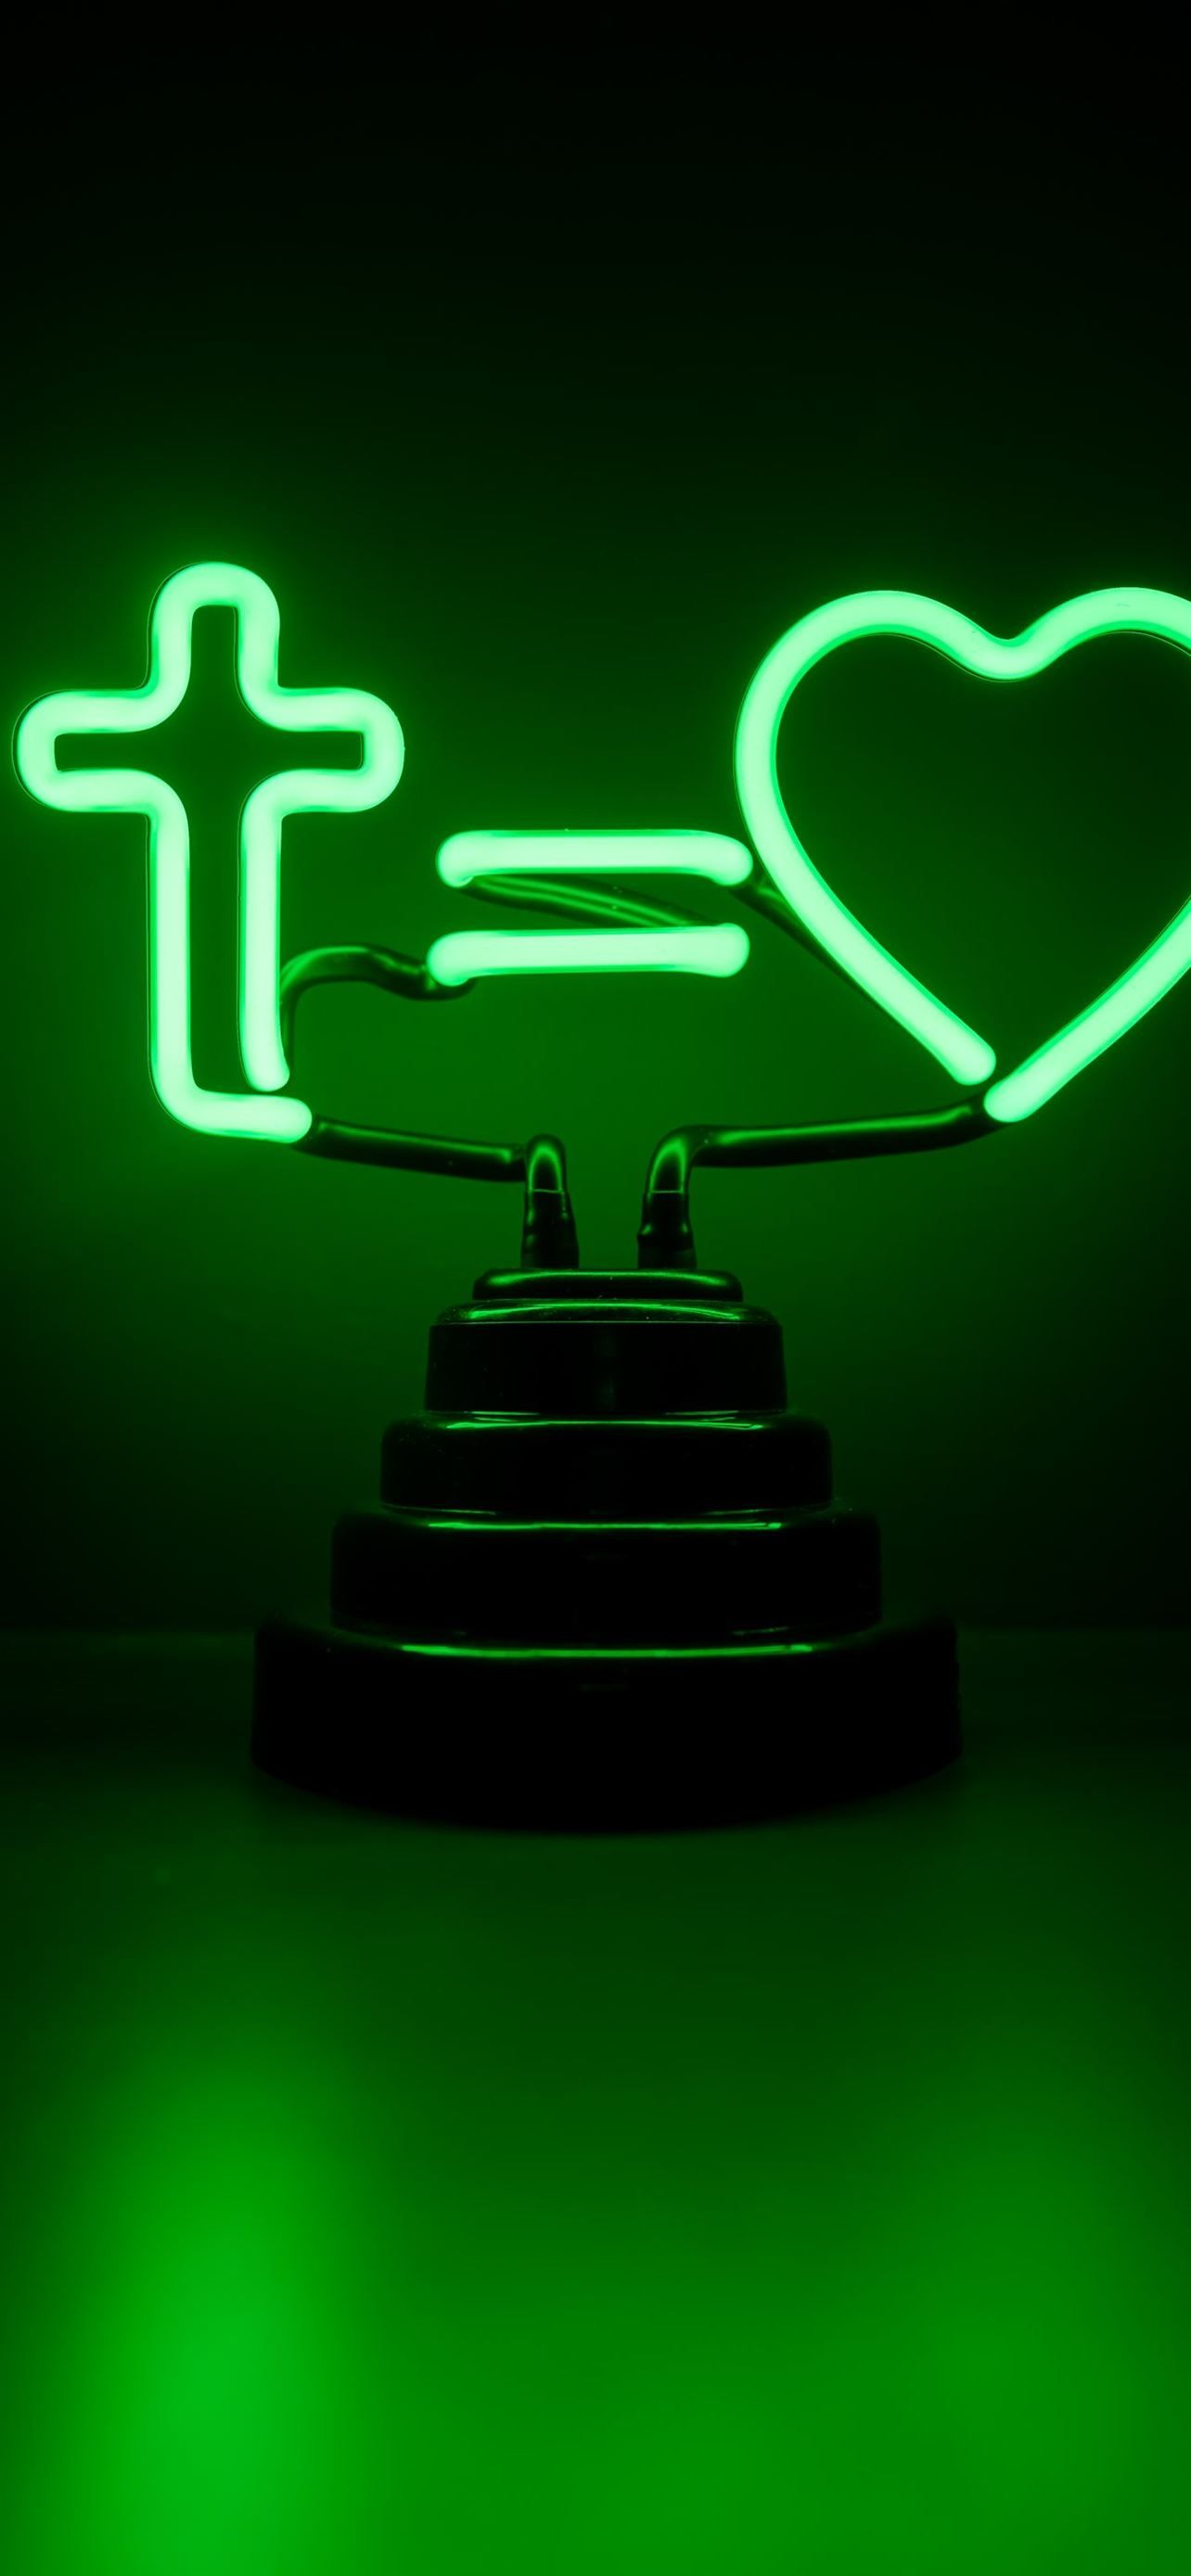 A green neon sign with a cross and a heart. - Neon green